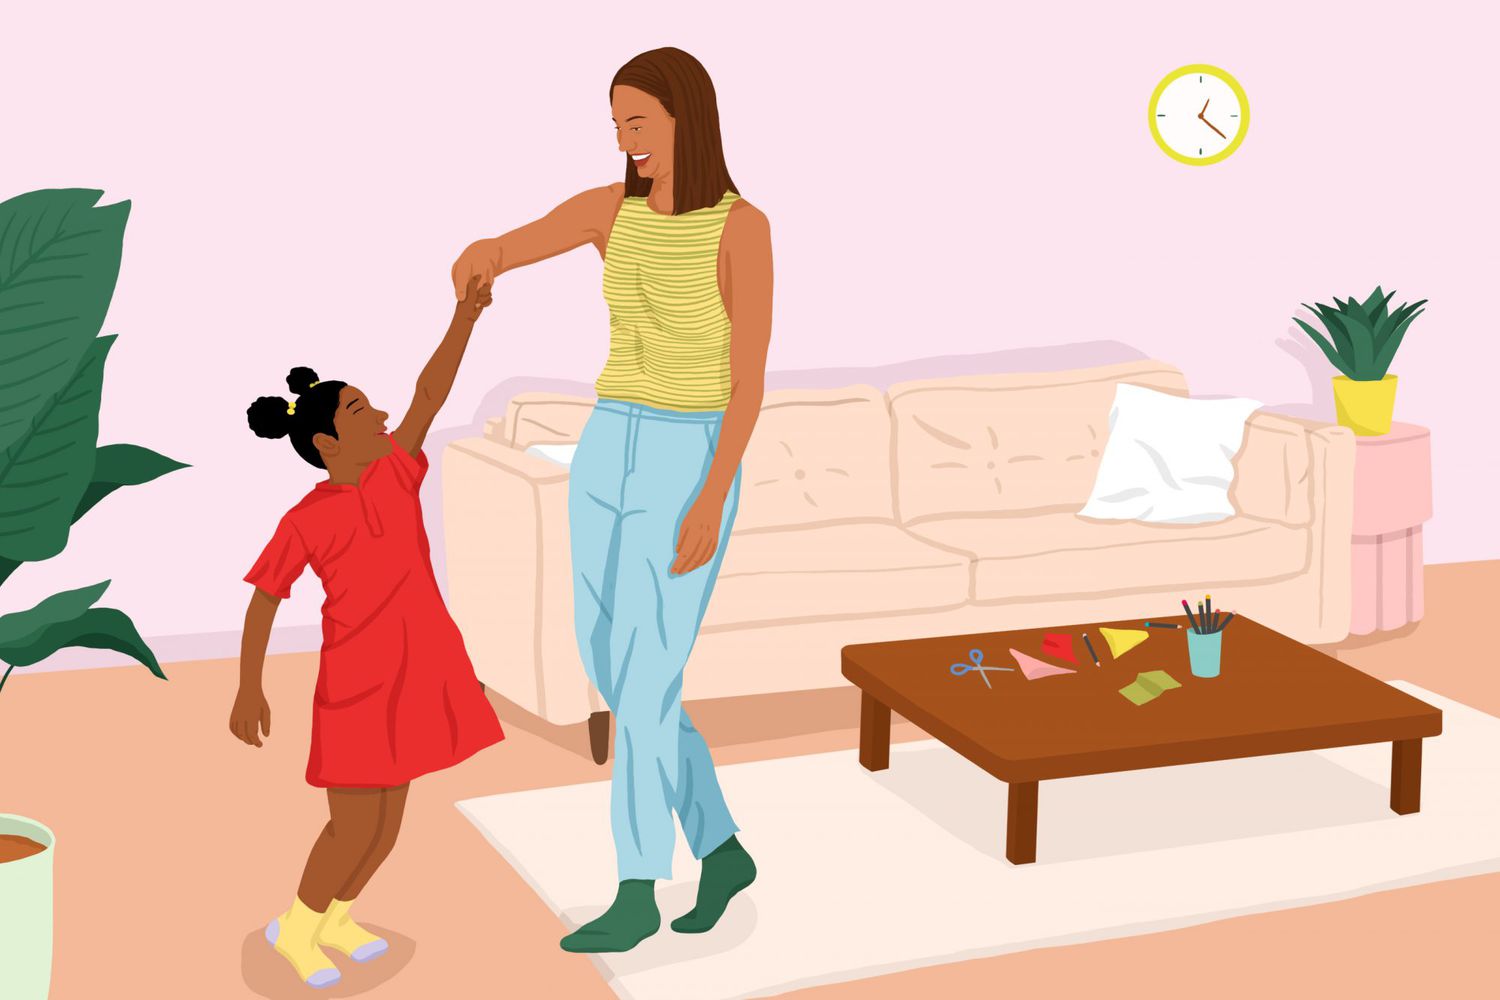 An illustration of a mom dancing with her daughter in a living room.